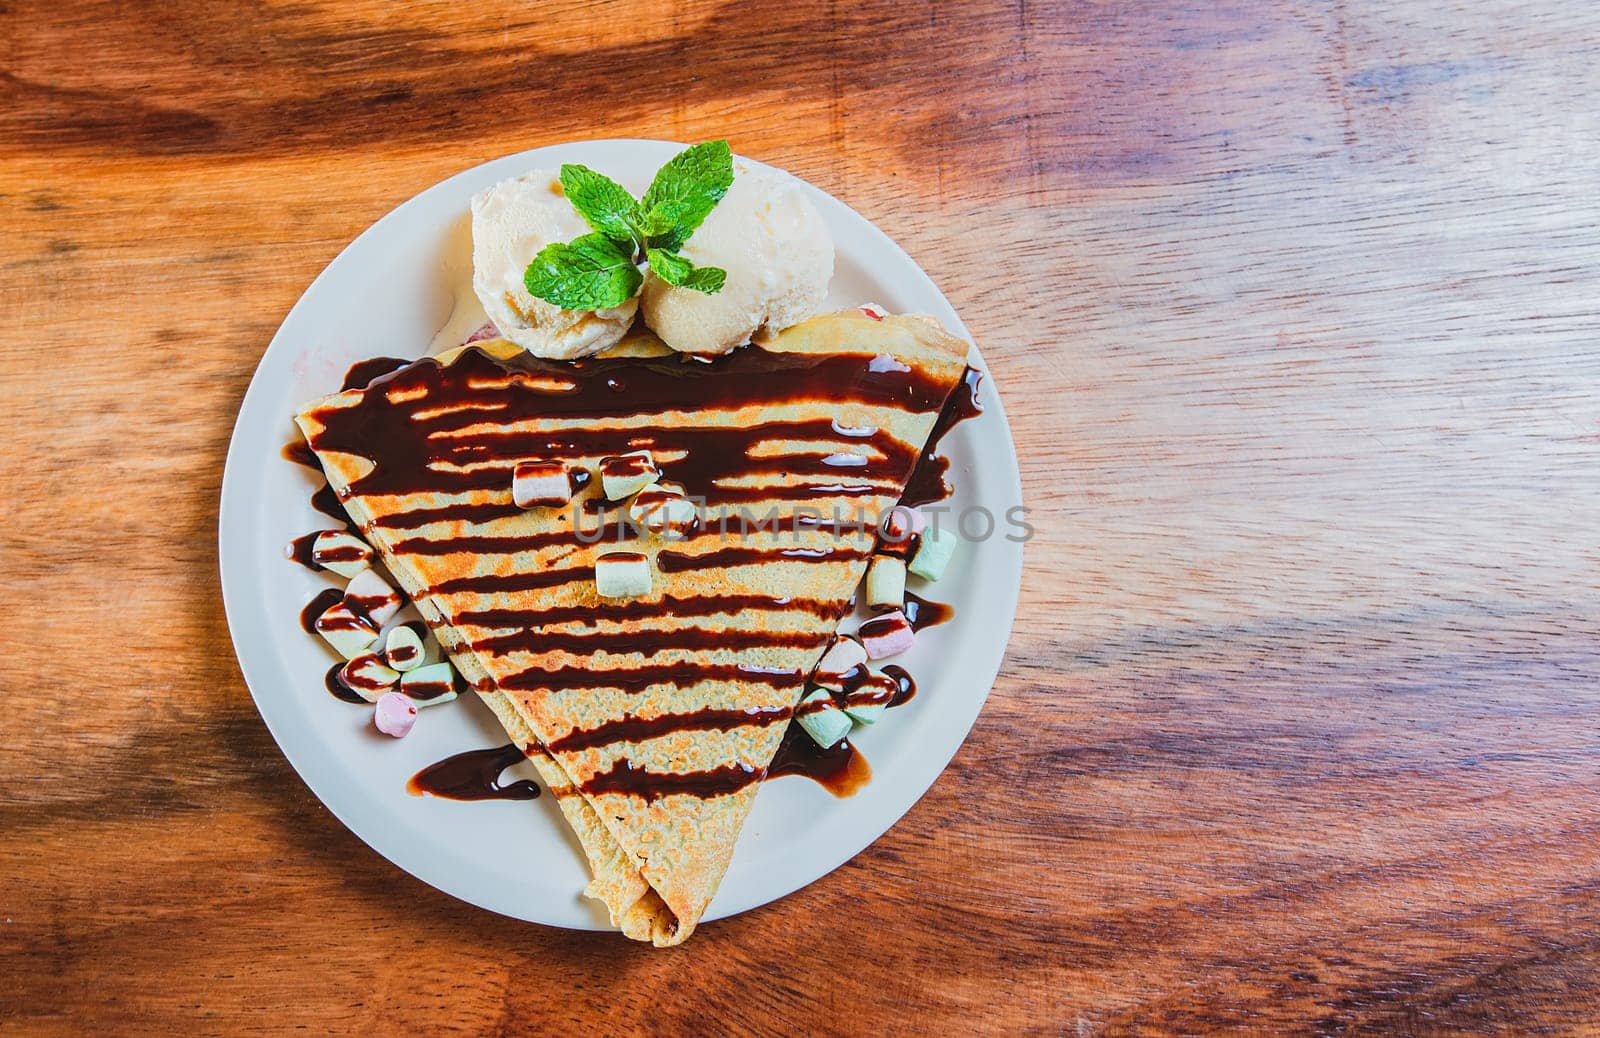 Top view of chocolate crepe with ice cream on wooden table. High angle view of chocolate crepe with ice cream on wooden background by isaiphoto